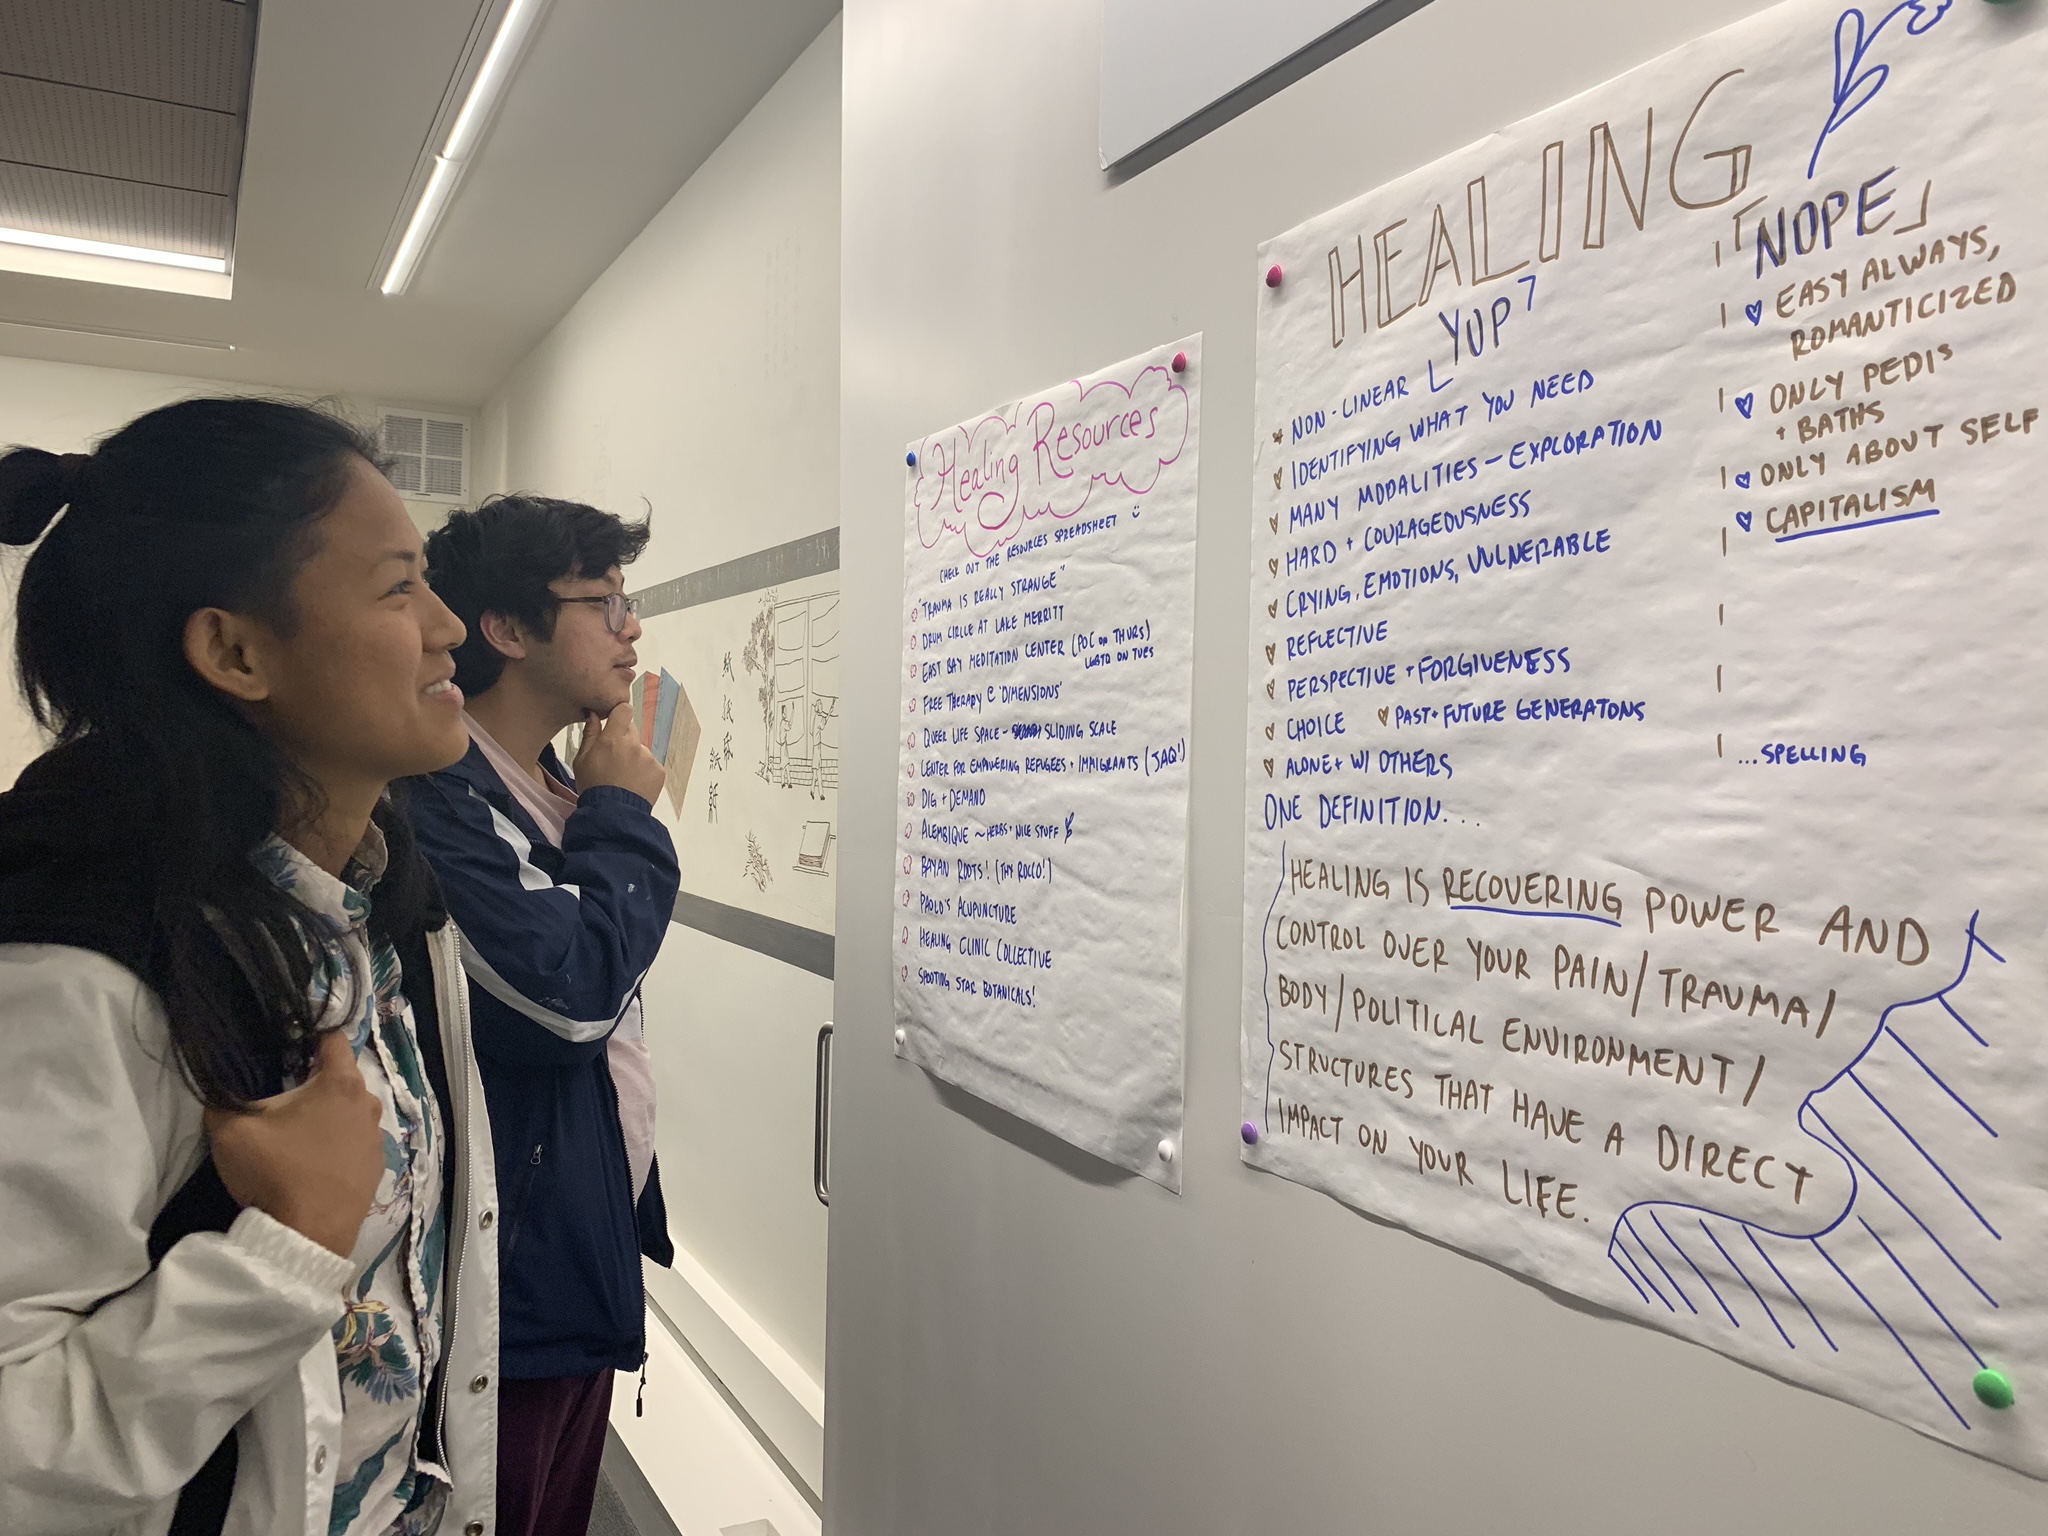 Image description: Two APIENC members are indoors looking at flipchart papers attached to the wall. They are about healing and healing resources.